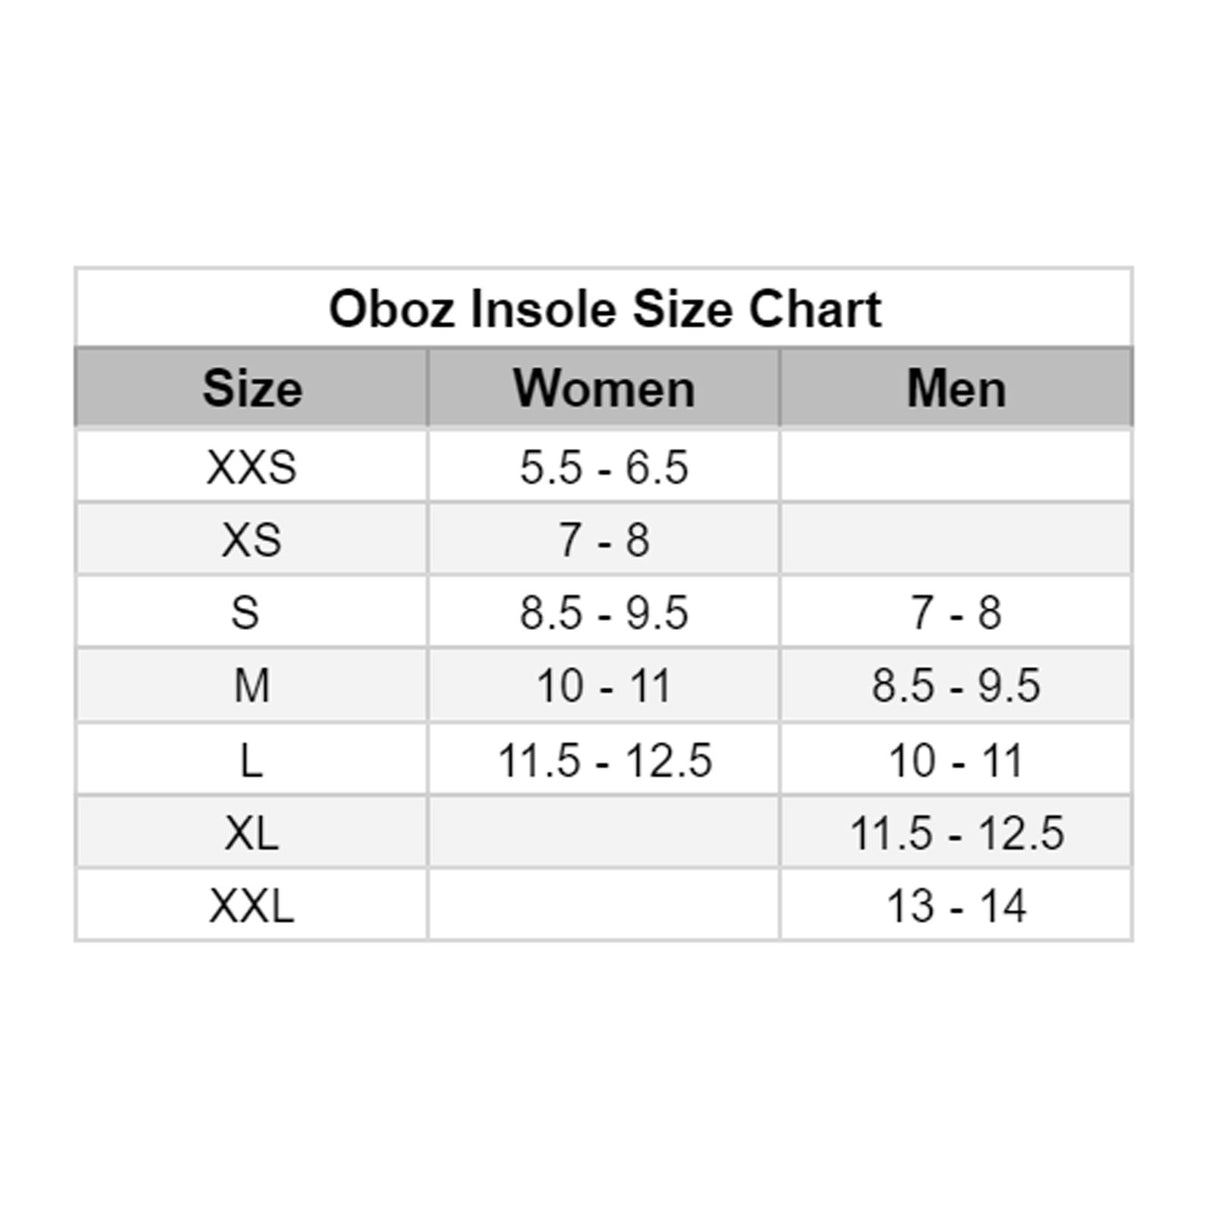 Oboz O FIT Insole Plus Insole (Unisex) - Green Accessories - Orthotics/Insoles - Full Length - The Heel Shoe Fitters